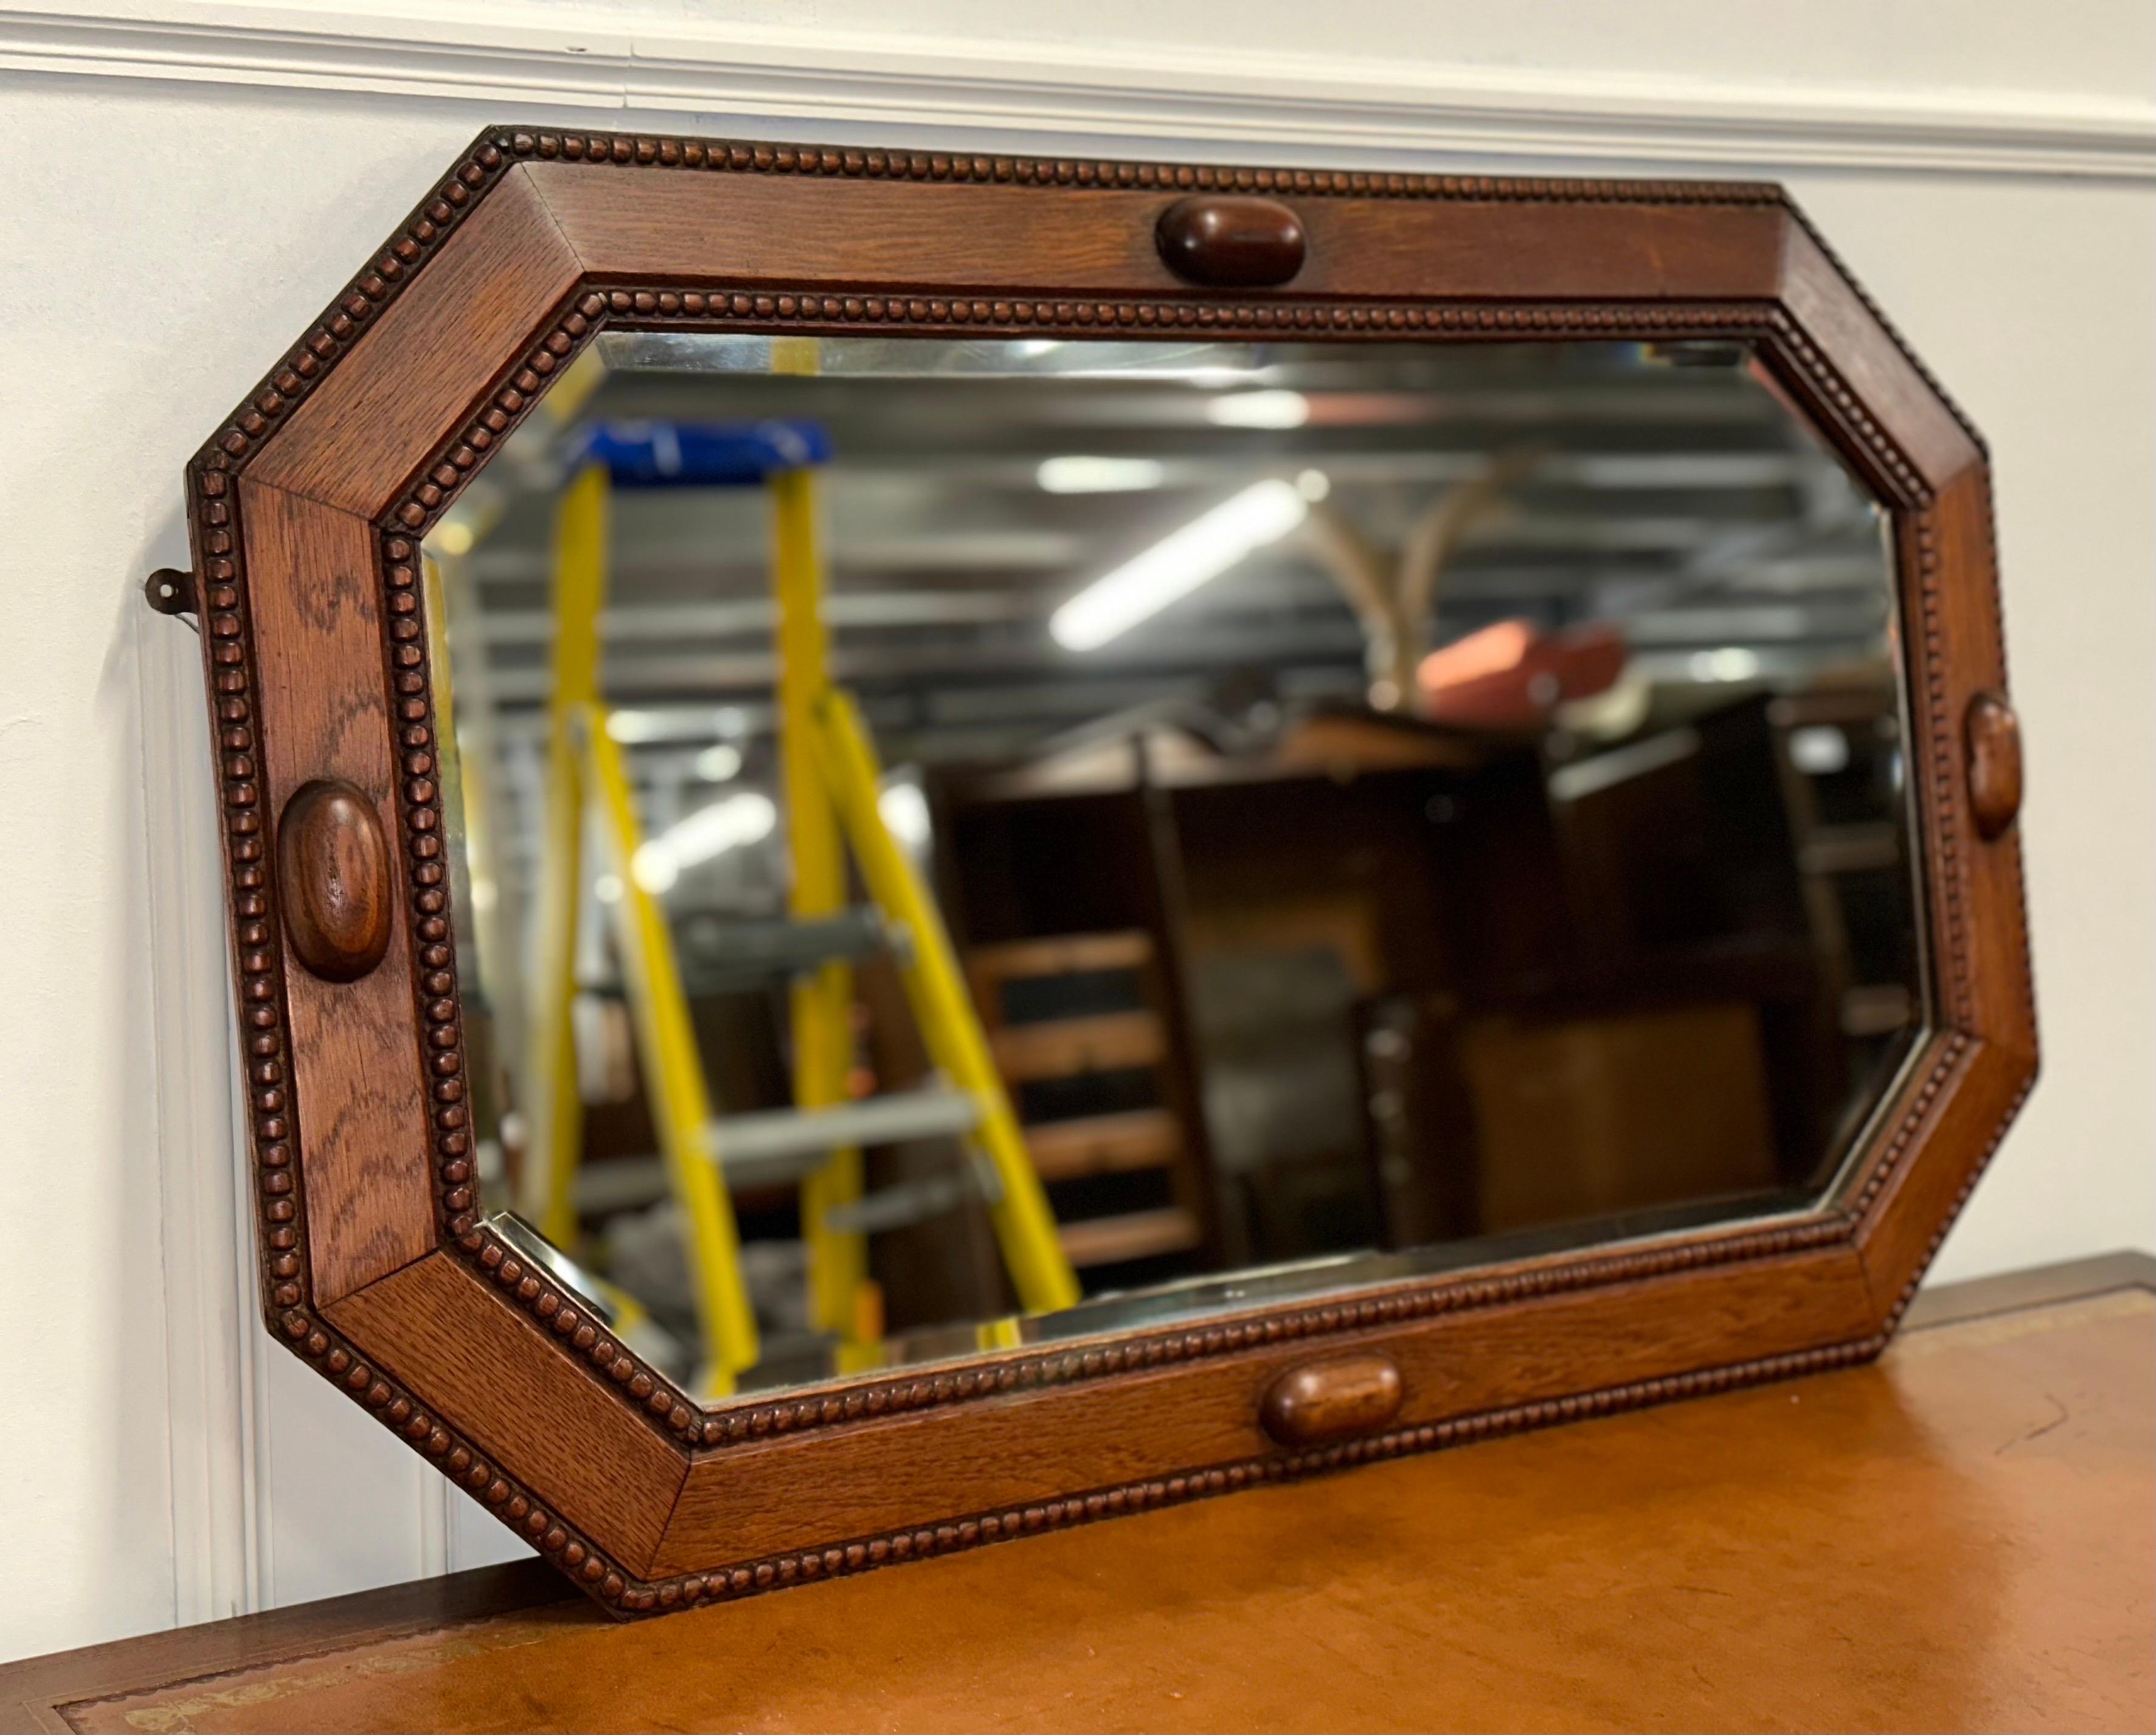 We are delighted to offer for sale this Art Deco 1920s Oak Bevelled Mirror.

An Art Deco 1920s Oak Beveled Mirror is a stunning piece of antique furniture that showcases the stylish and luxurious design of the Art Deco era. The mirror frame is